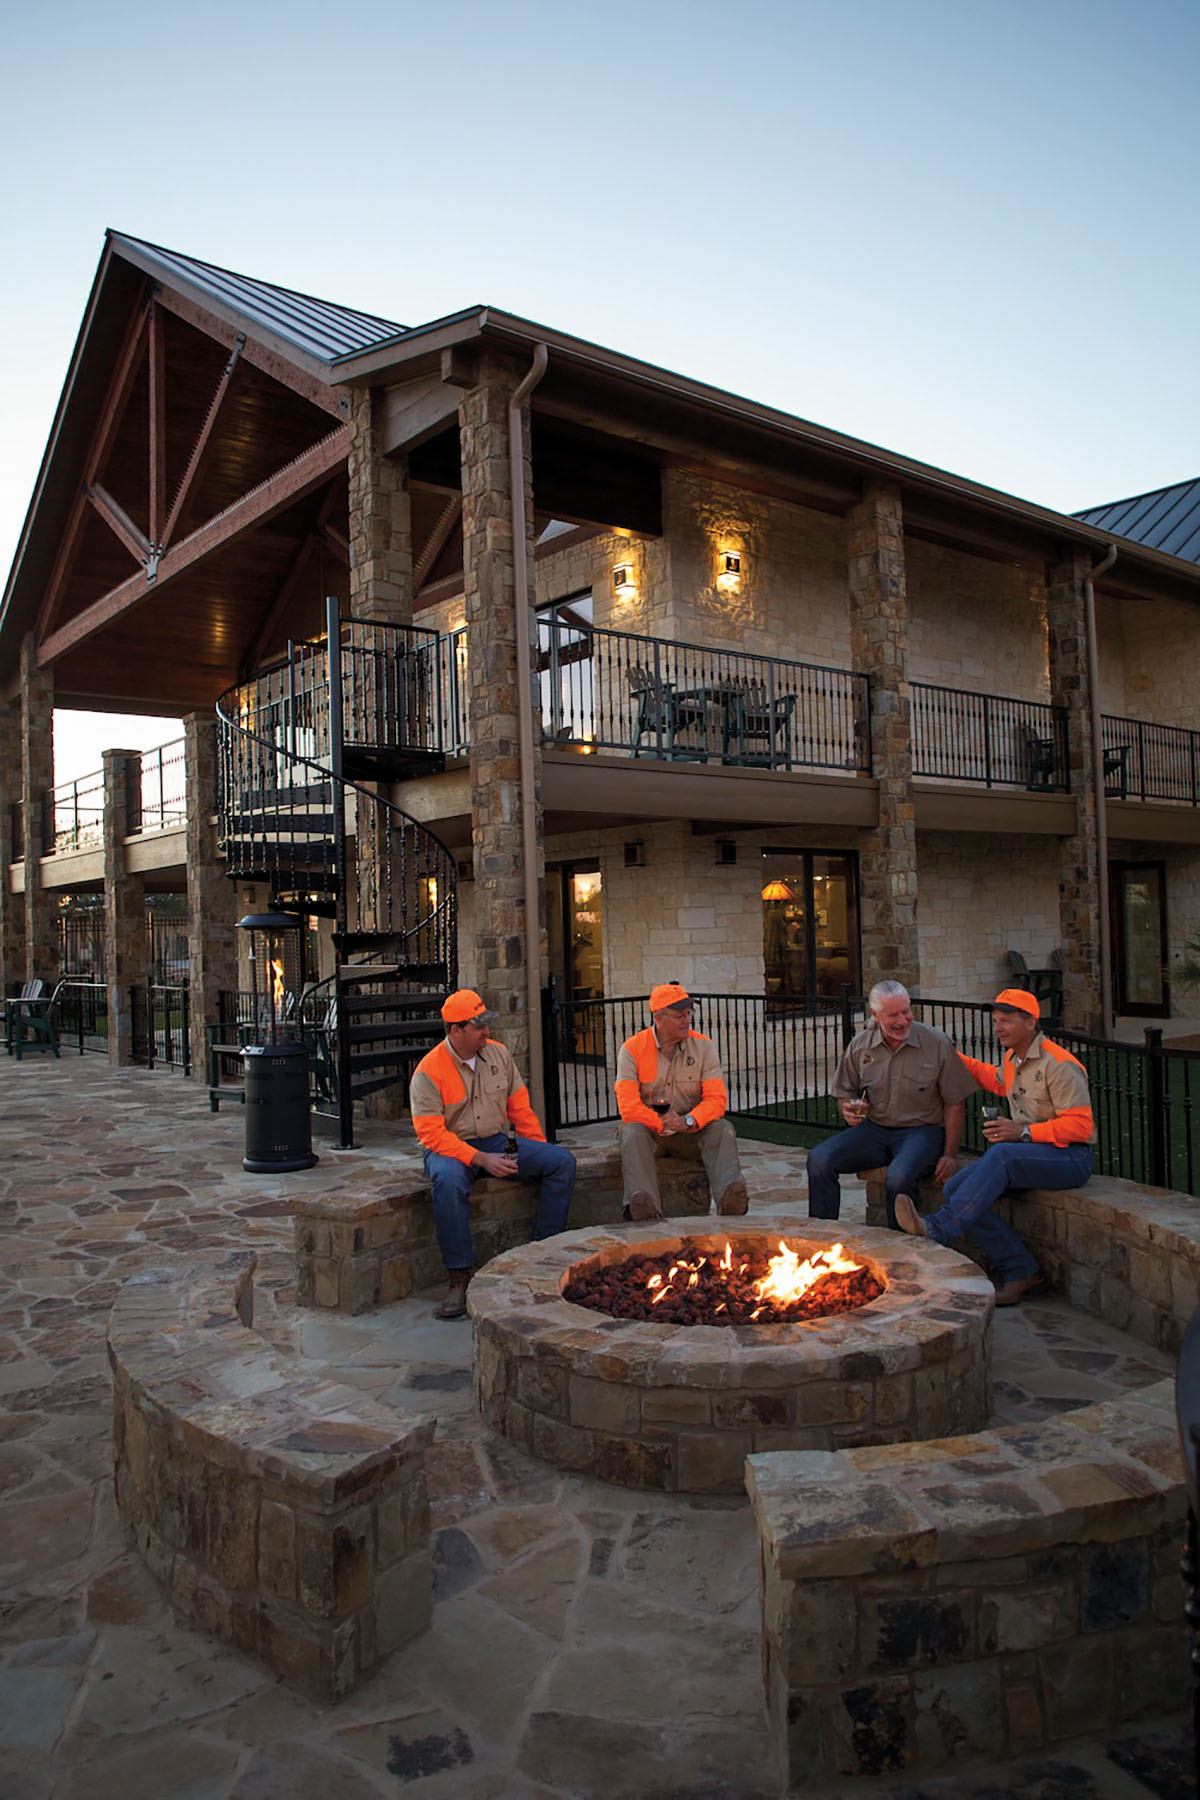 A group of people in orange reflective vests sit around a firepit outside a large lodge